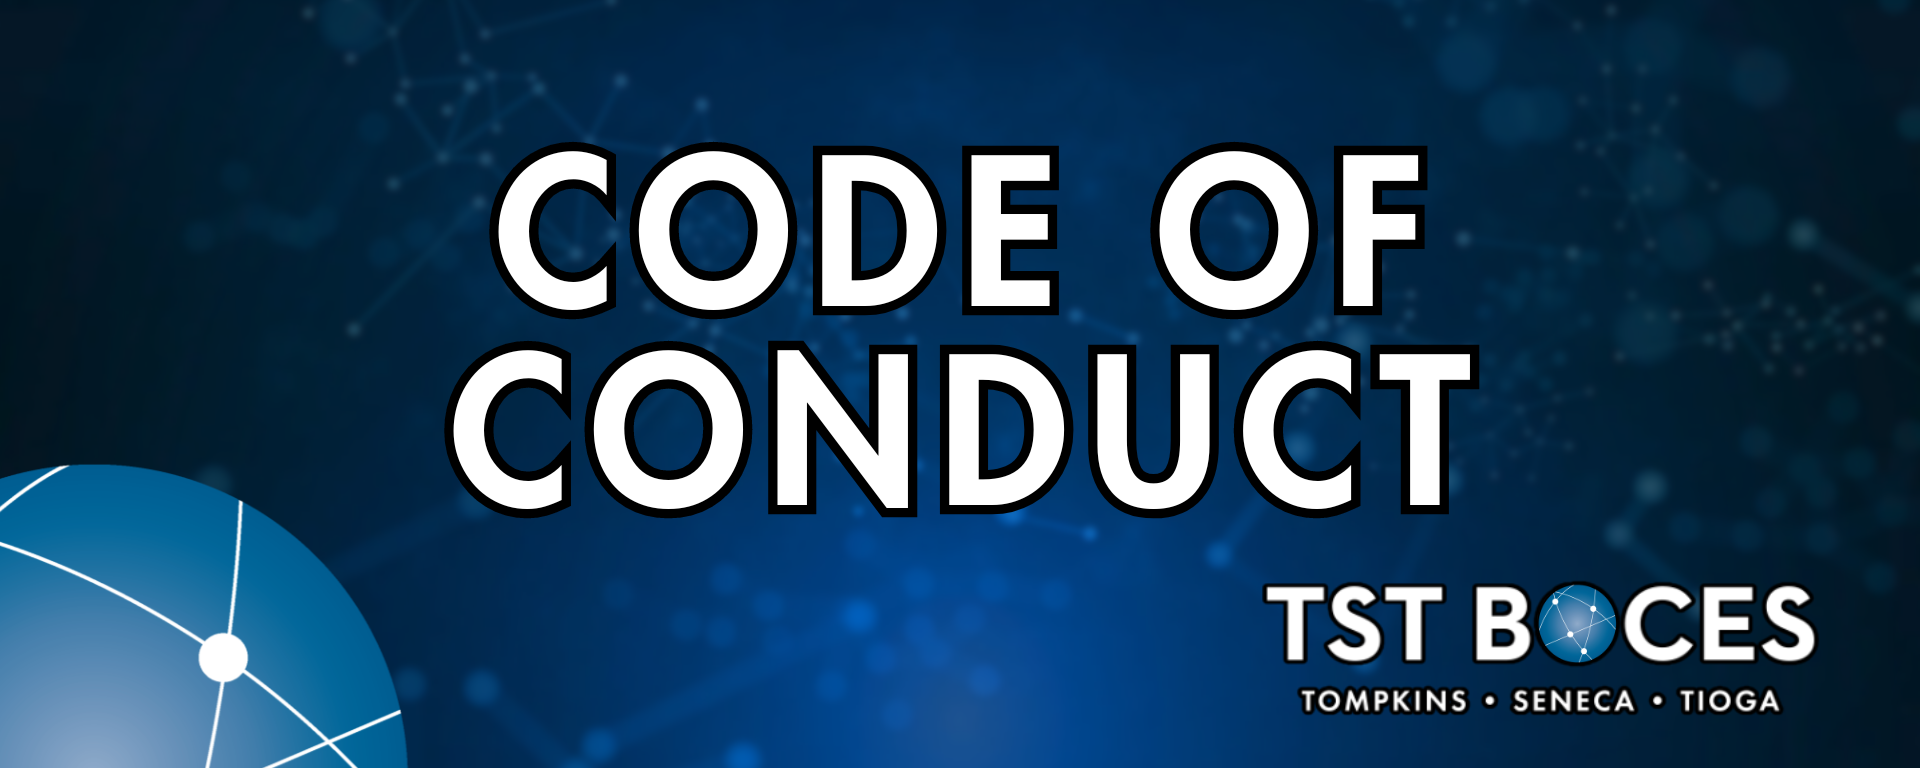 CODE OF CONDUCT BANNER